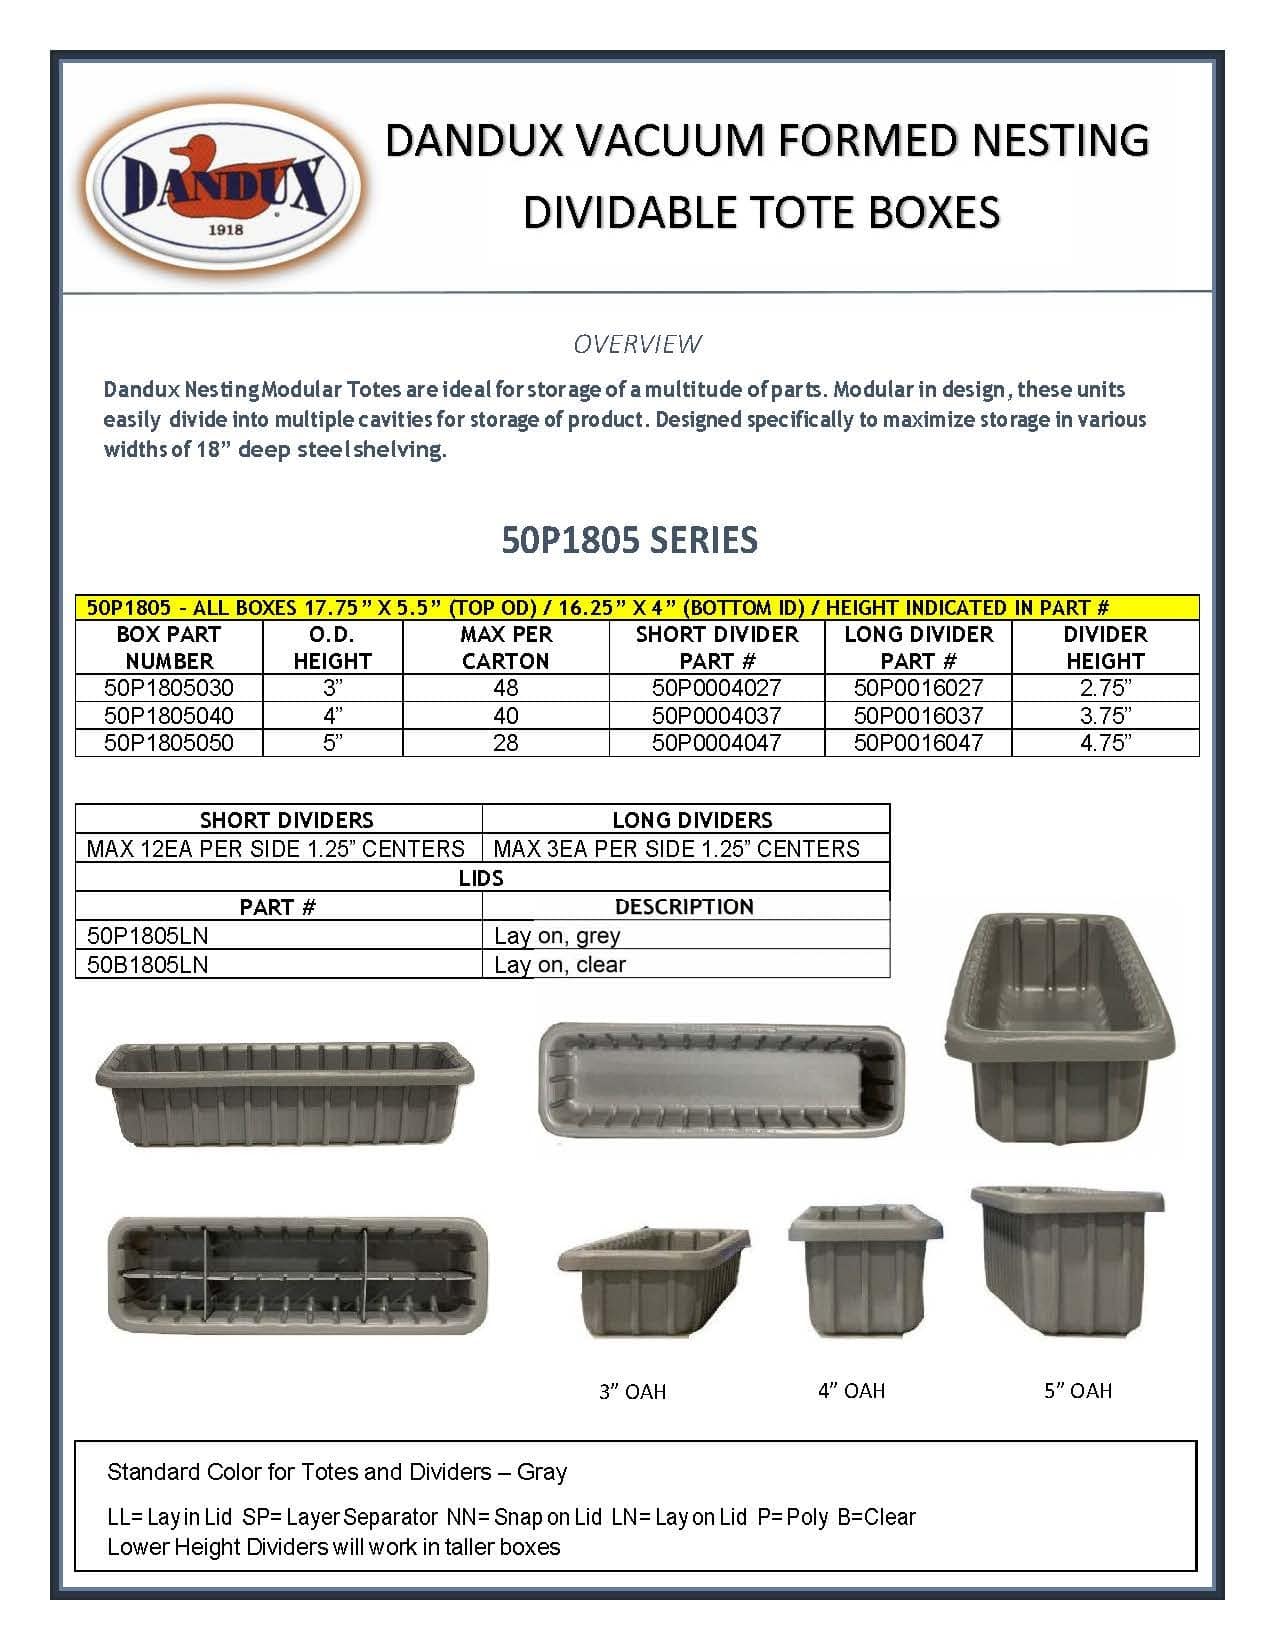 Dandux Nesting Modular Totes. Modular in design, these units easily divide into multiple cavities for storage of product.